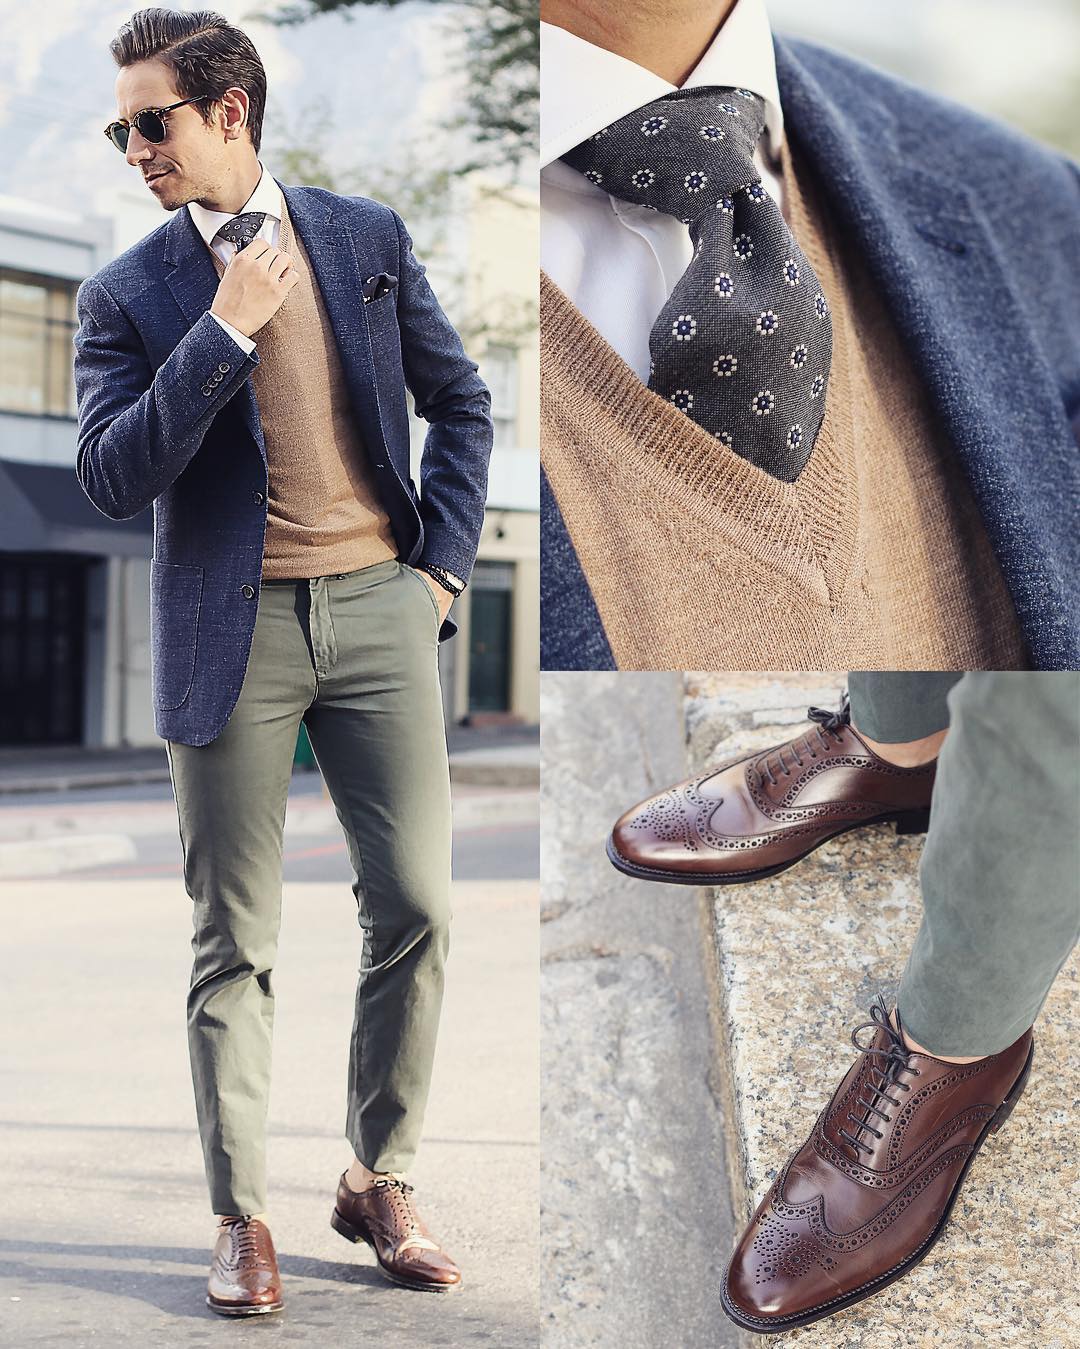 Suit, Tie And Shoes Combinations For Men